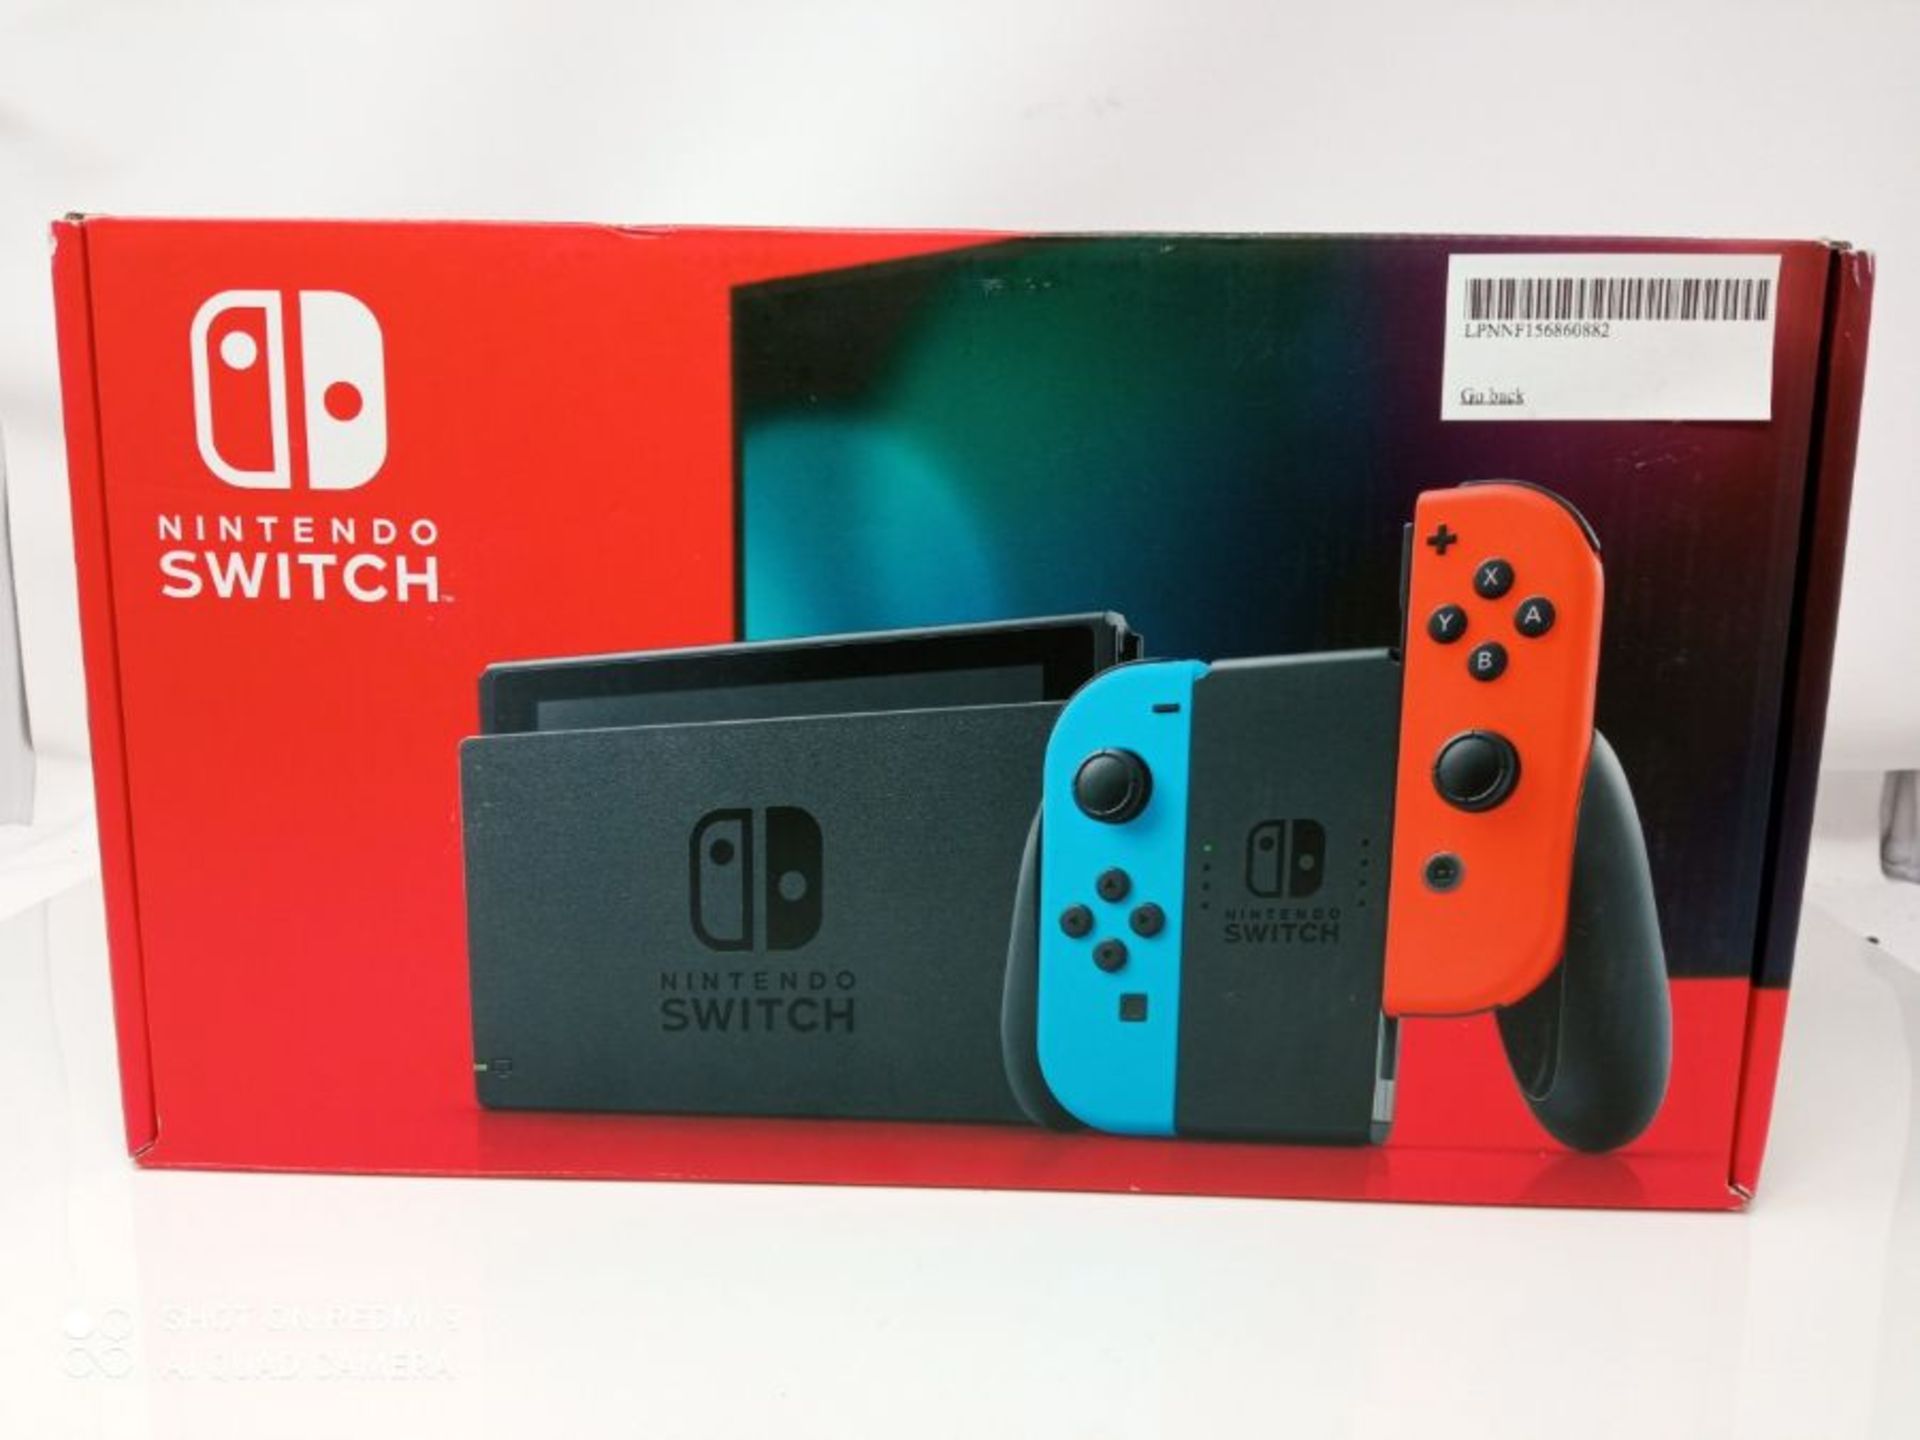 Nintendo Switch (Neon Red/Neon blue) - Image 3 of 3